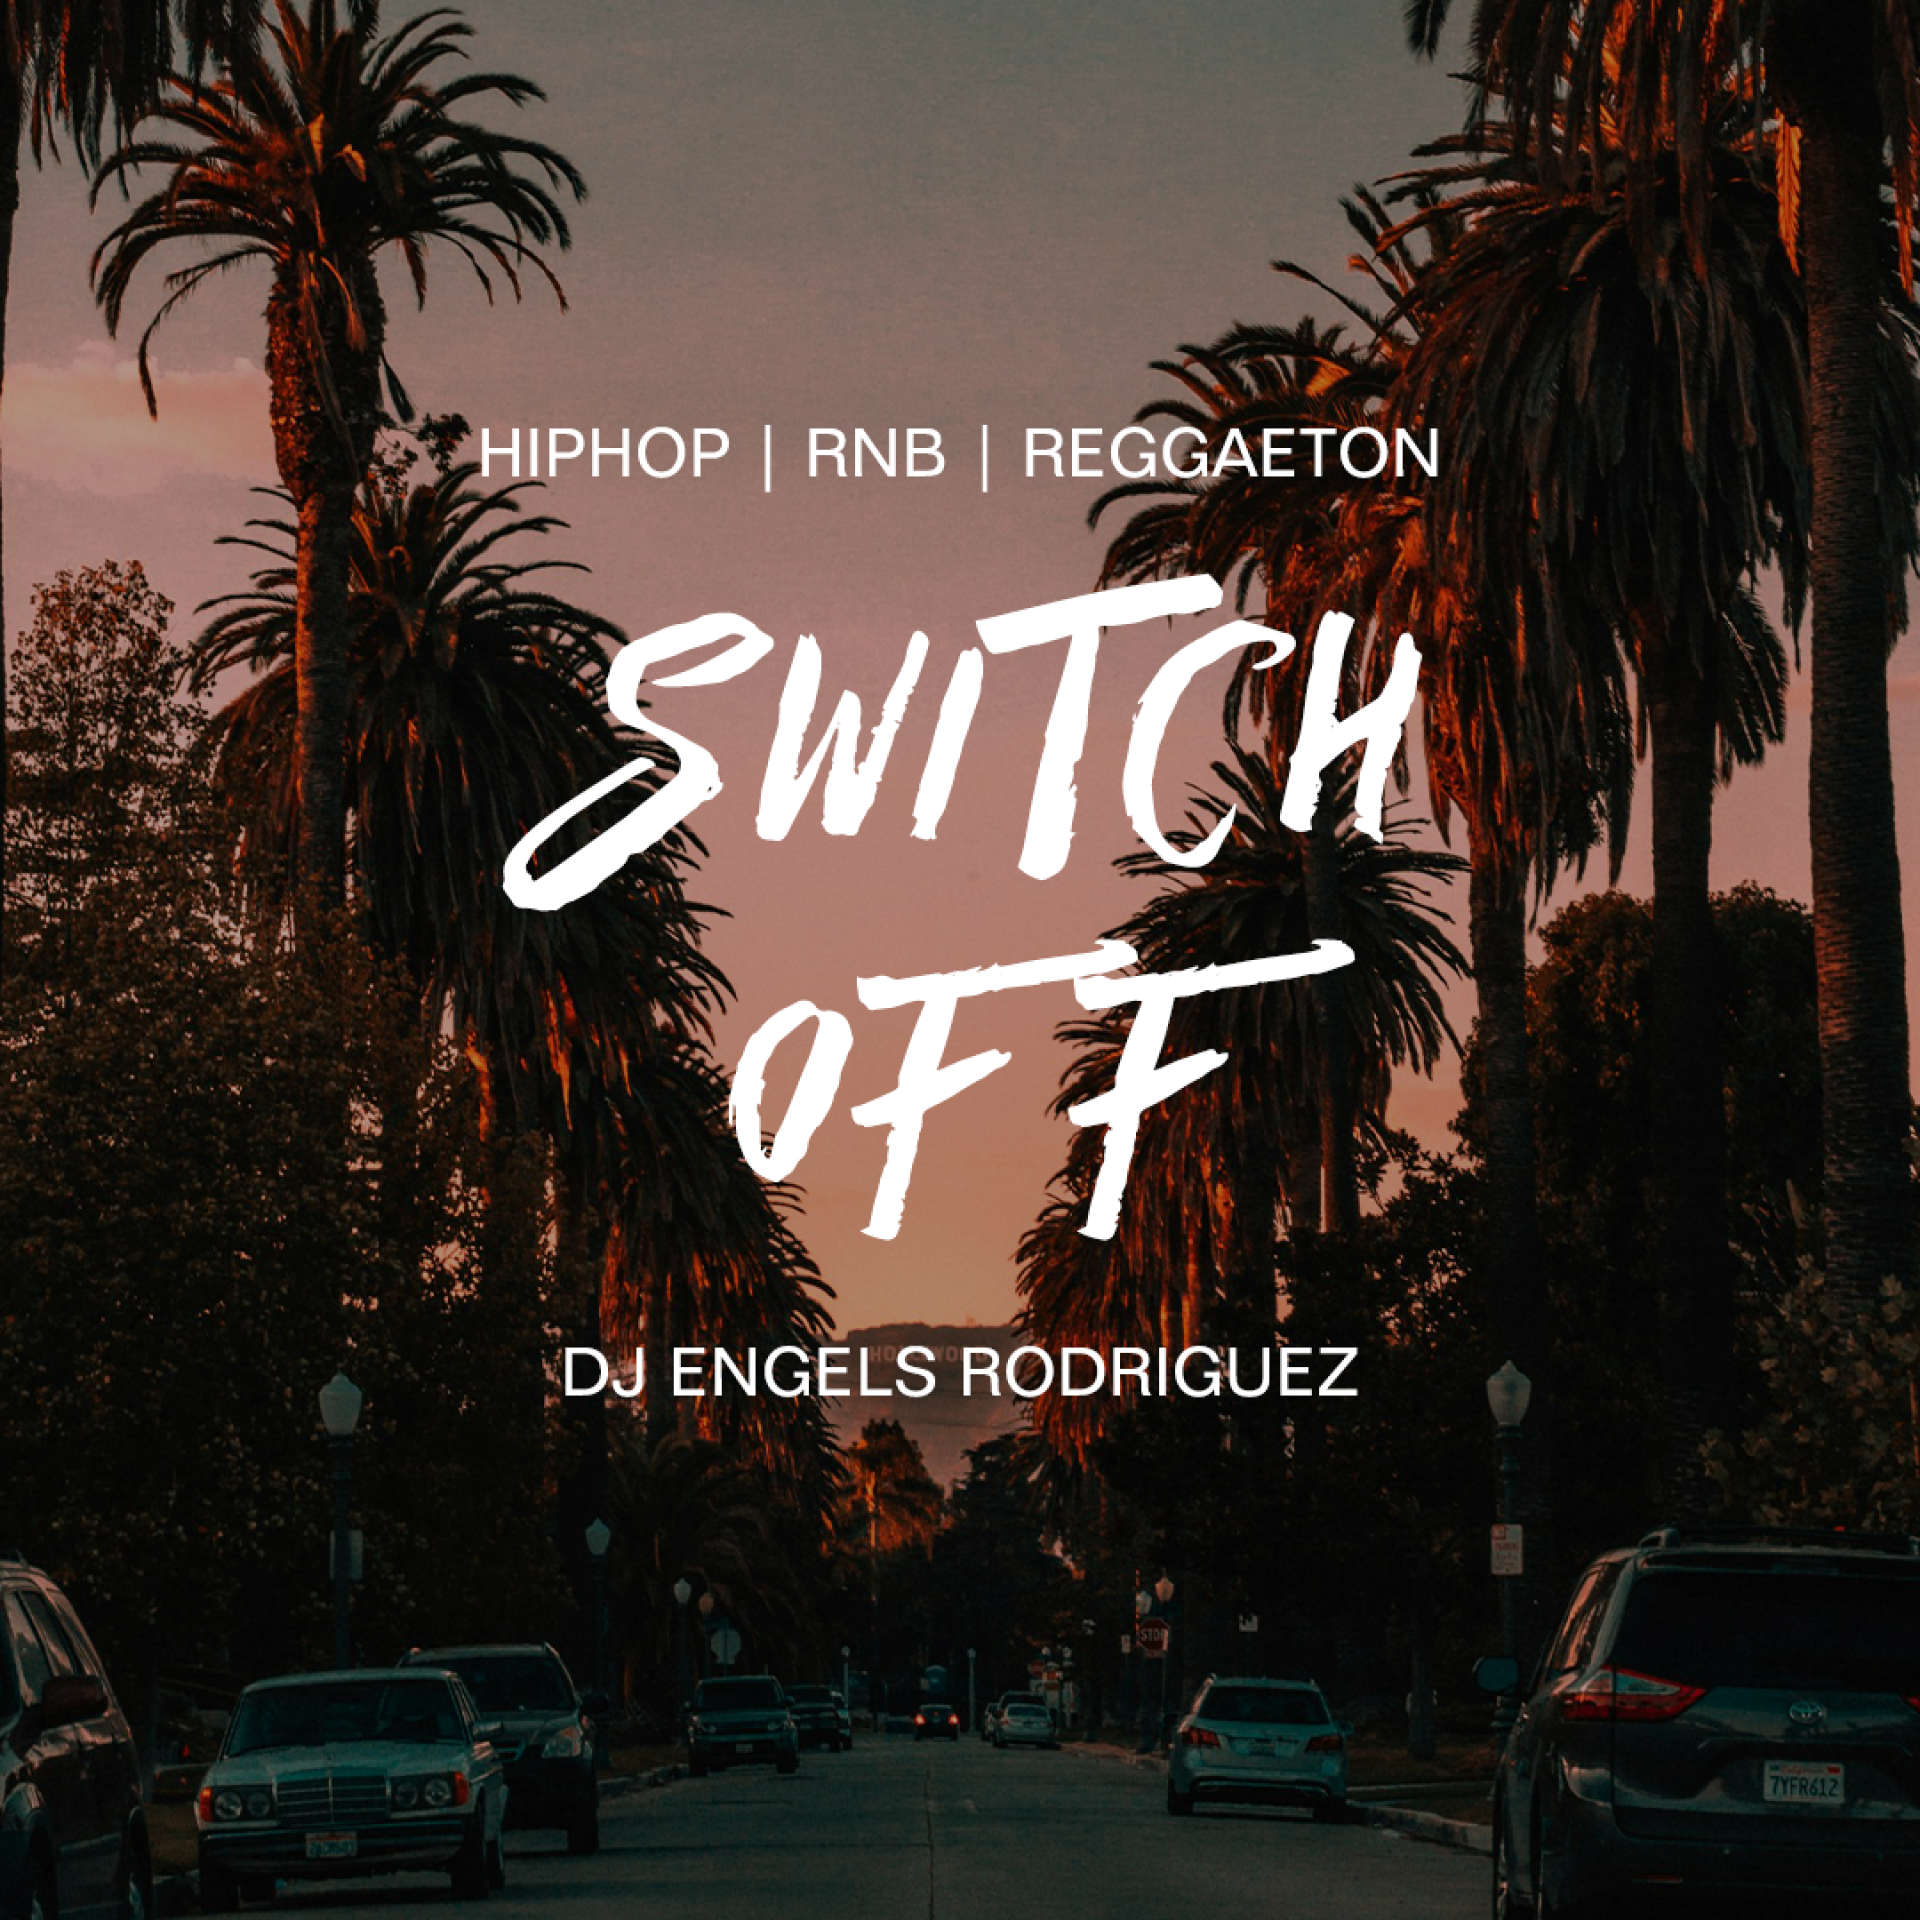 Switch off